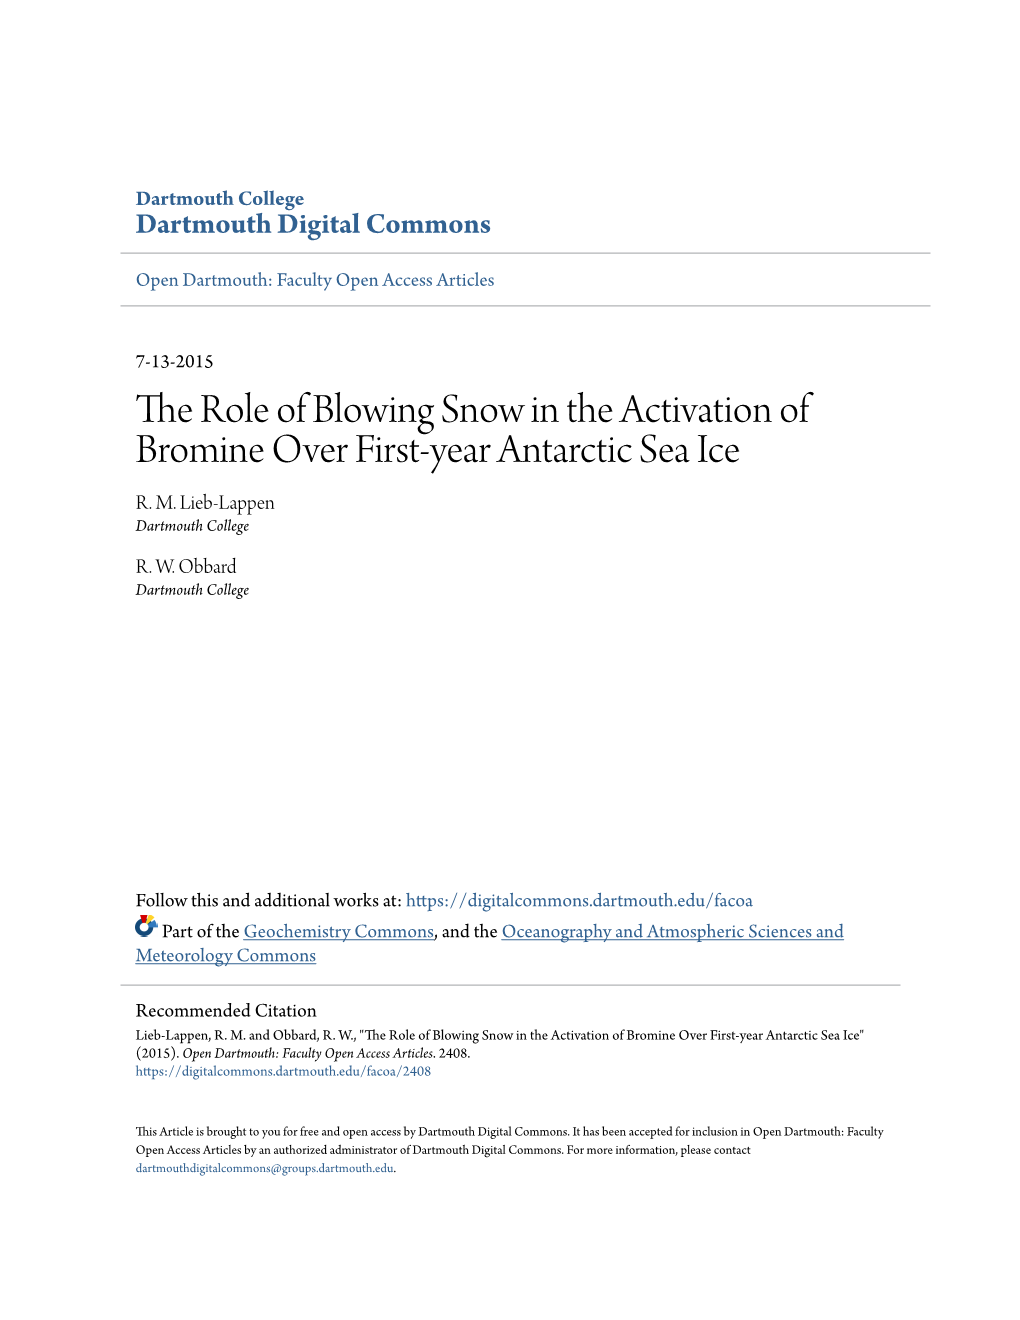 The Role of Blowing Snow in the Activation of Bromine Over First-Year Antarctic Sea Ice R